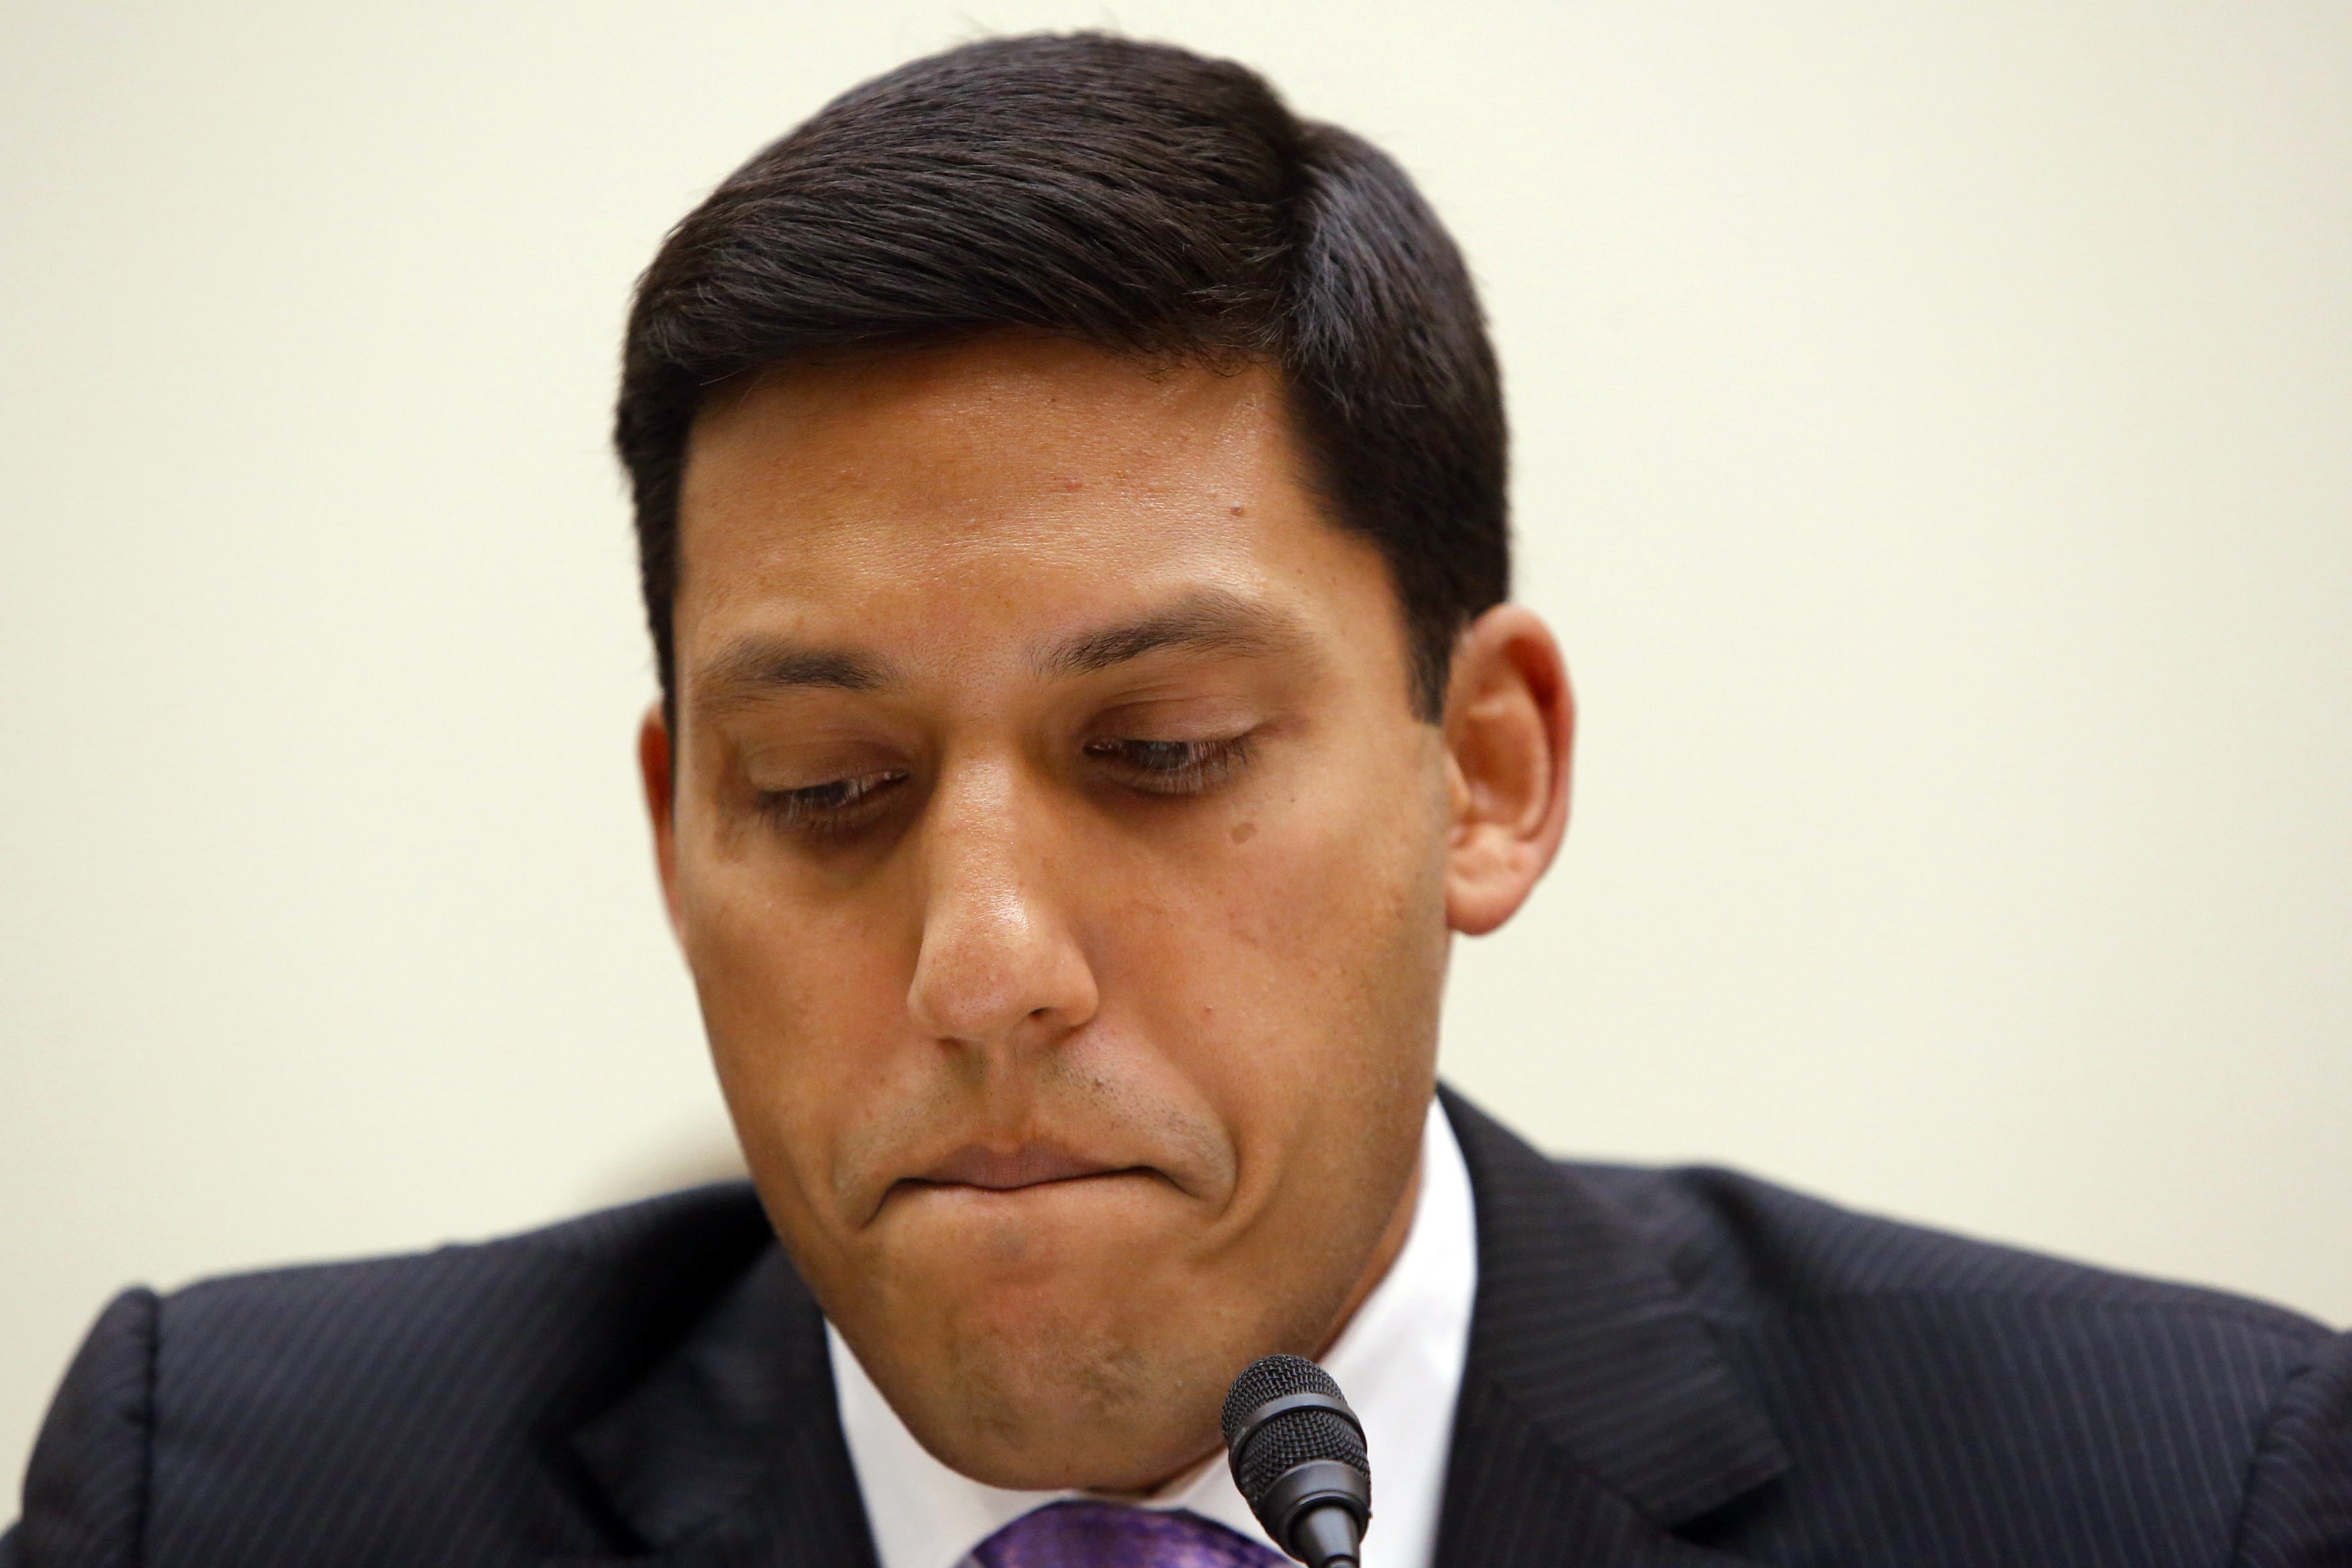 Roskefeller Foundation President Rajiv Shah, then U.S. Agency for International Development Administrator, testifies during a House Foreign Affairs Committee hearing on the international response to the Ebola outbreak in West Africa, on Capitol Hill in Washington November 13, 2014. REUTERS/Jonathan Ernst